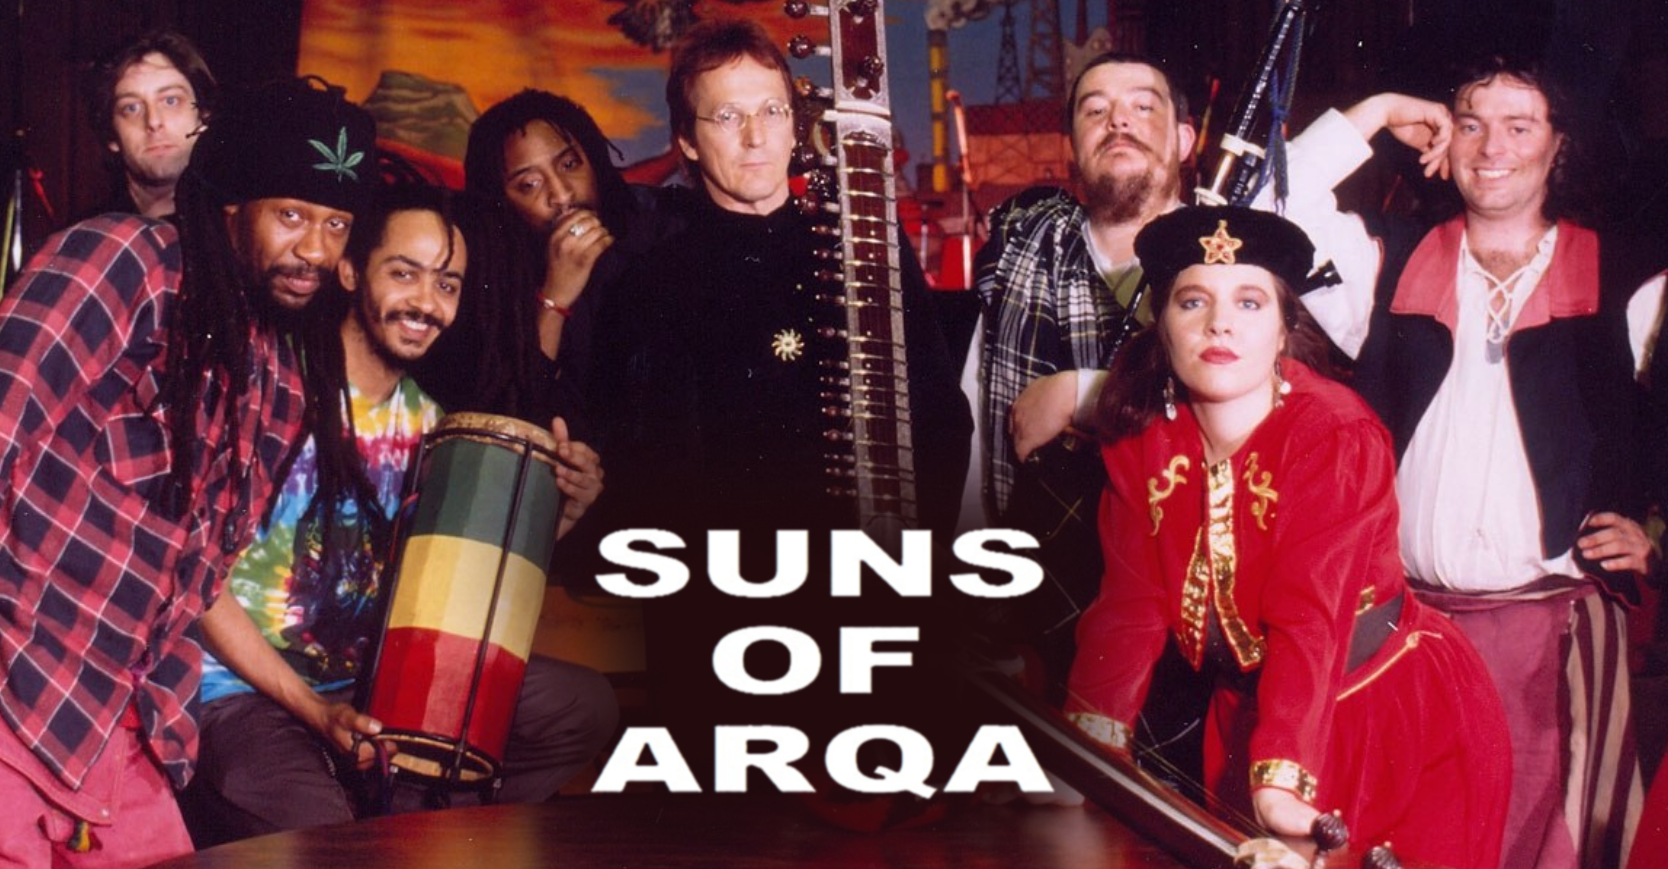 Celebrating the Suns Of Arqa: In honour of Wadada